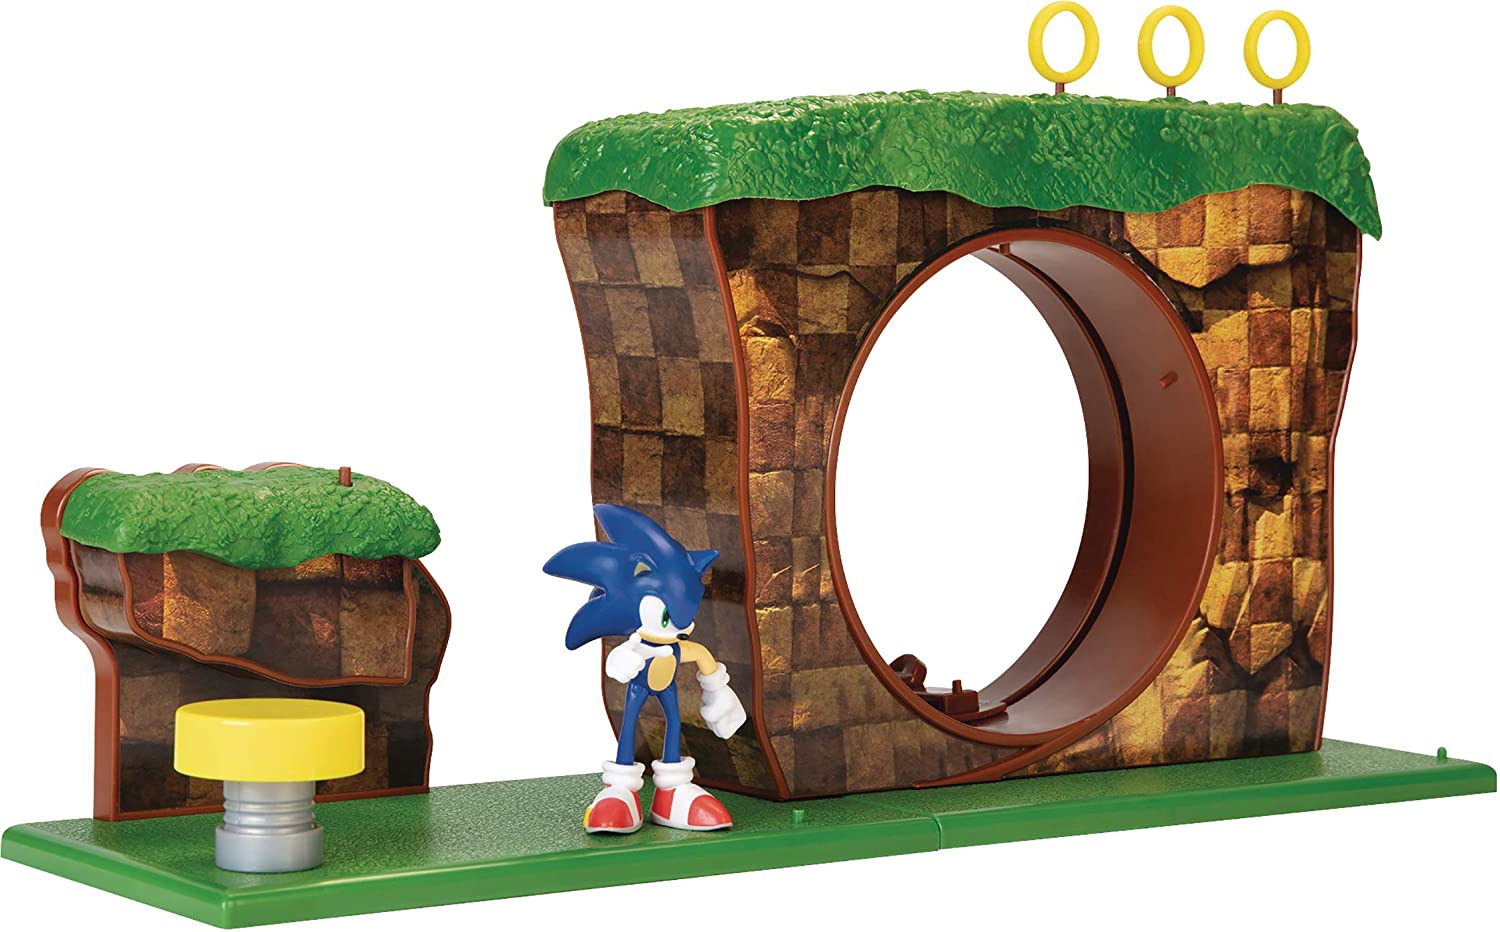 Sonic The Hedgehog Green Hill Zone Playset w/ 2.5" Sonic Action Figure $9.49 + Free S&H w/ Prime or orders $25+ ~ Amazon